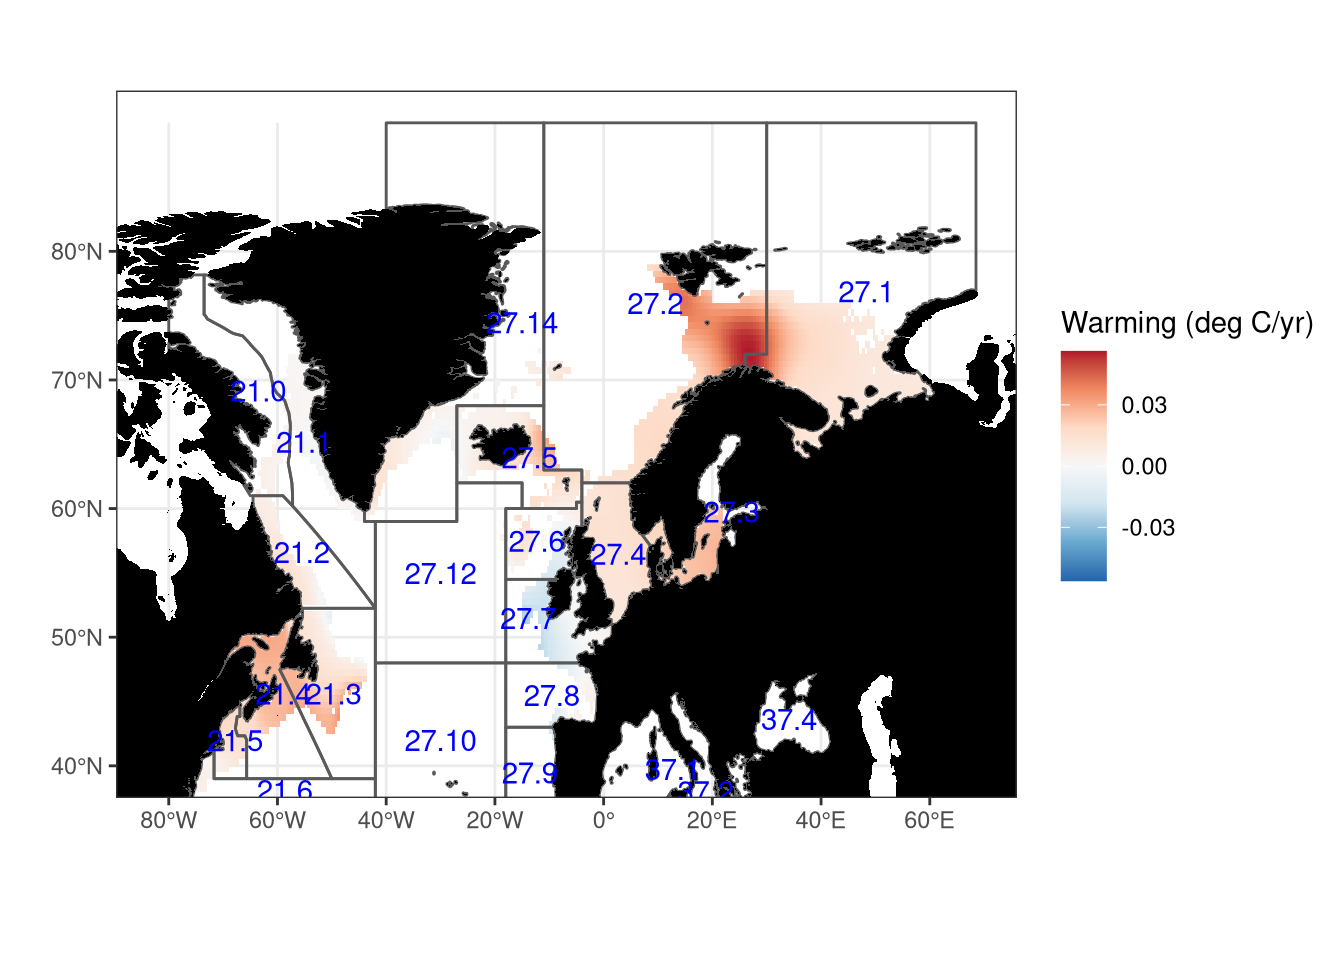 Average rate of warming derived from Aquamaps